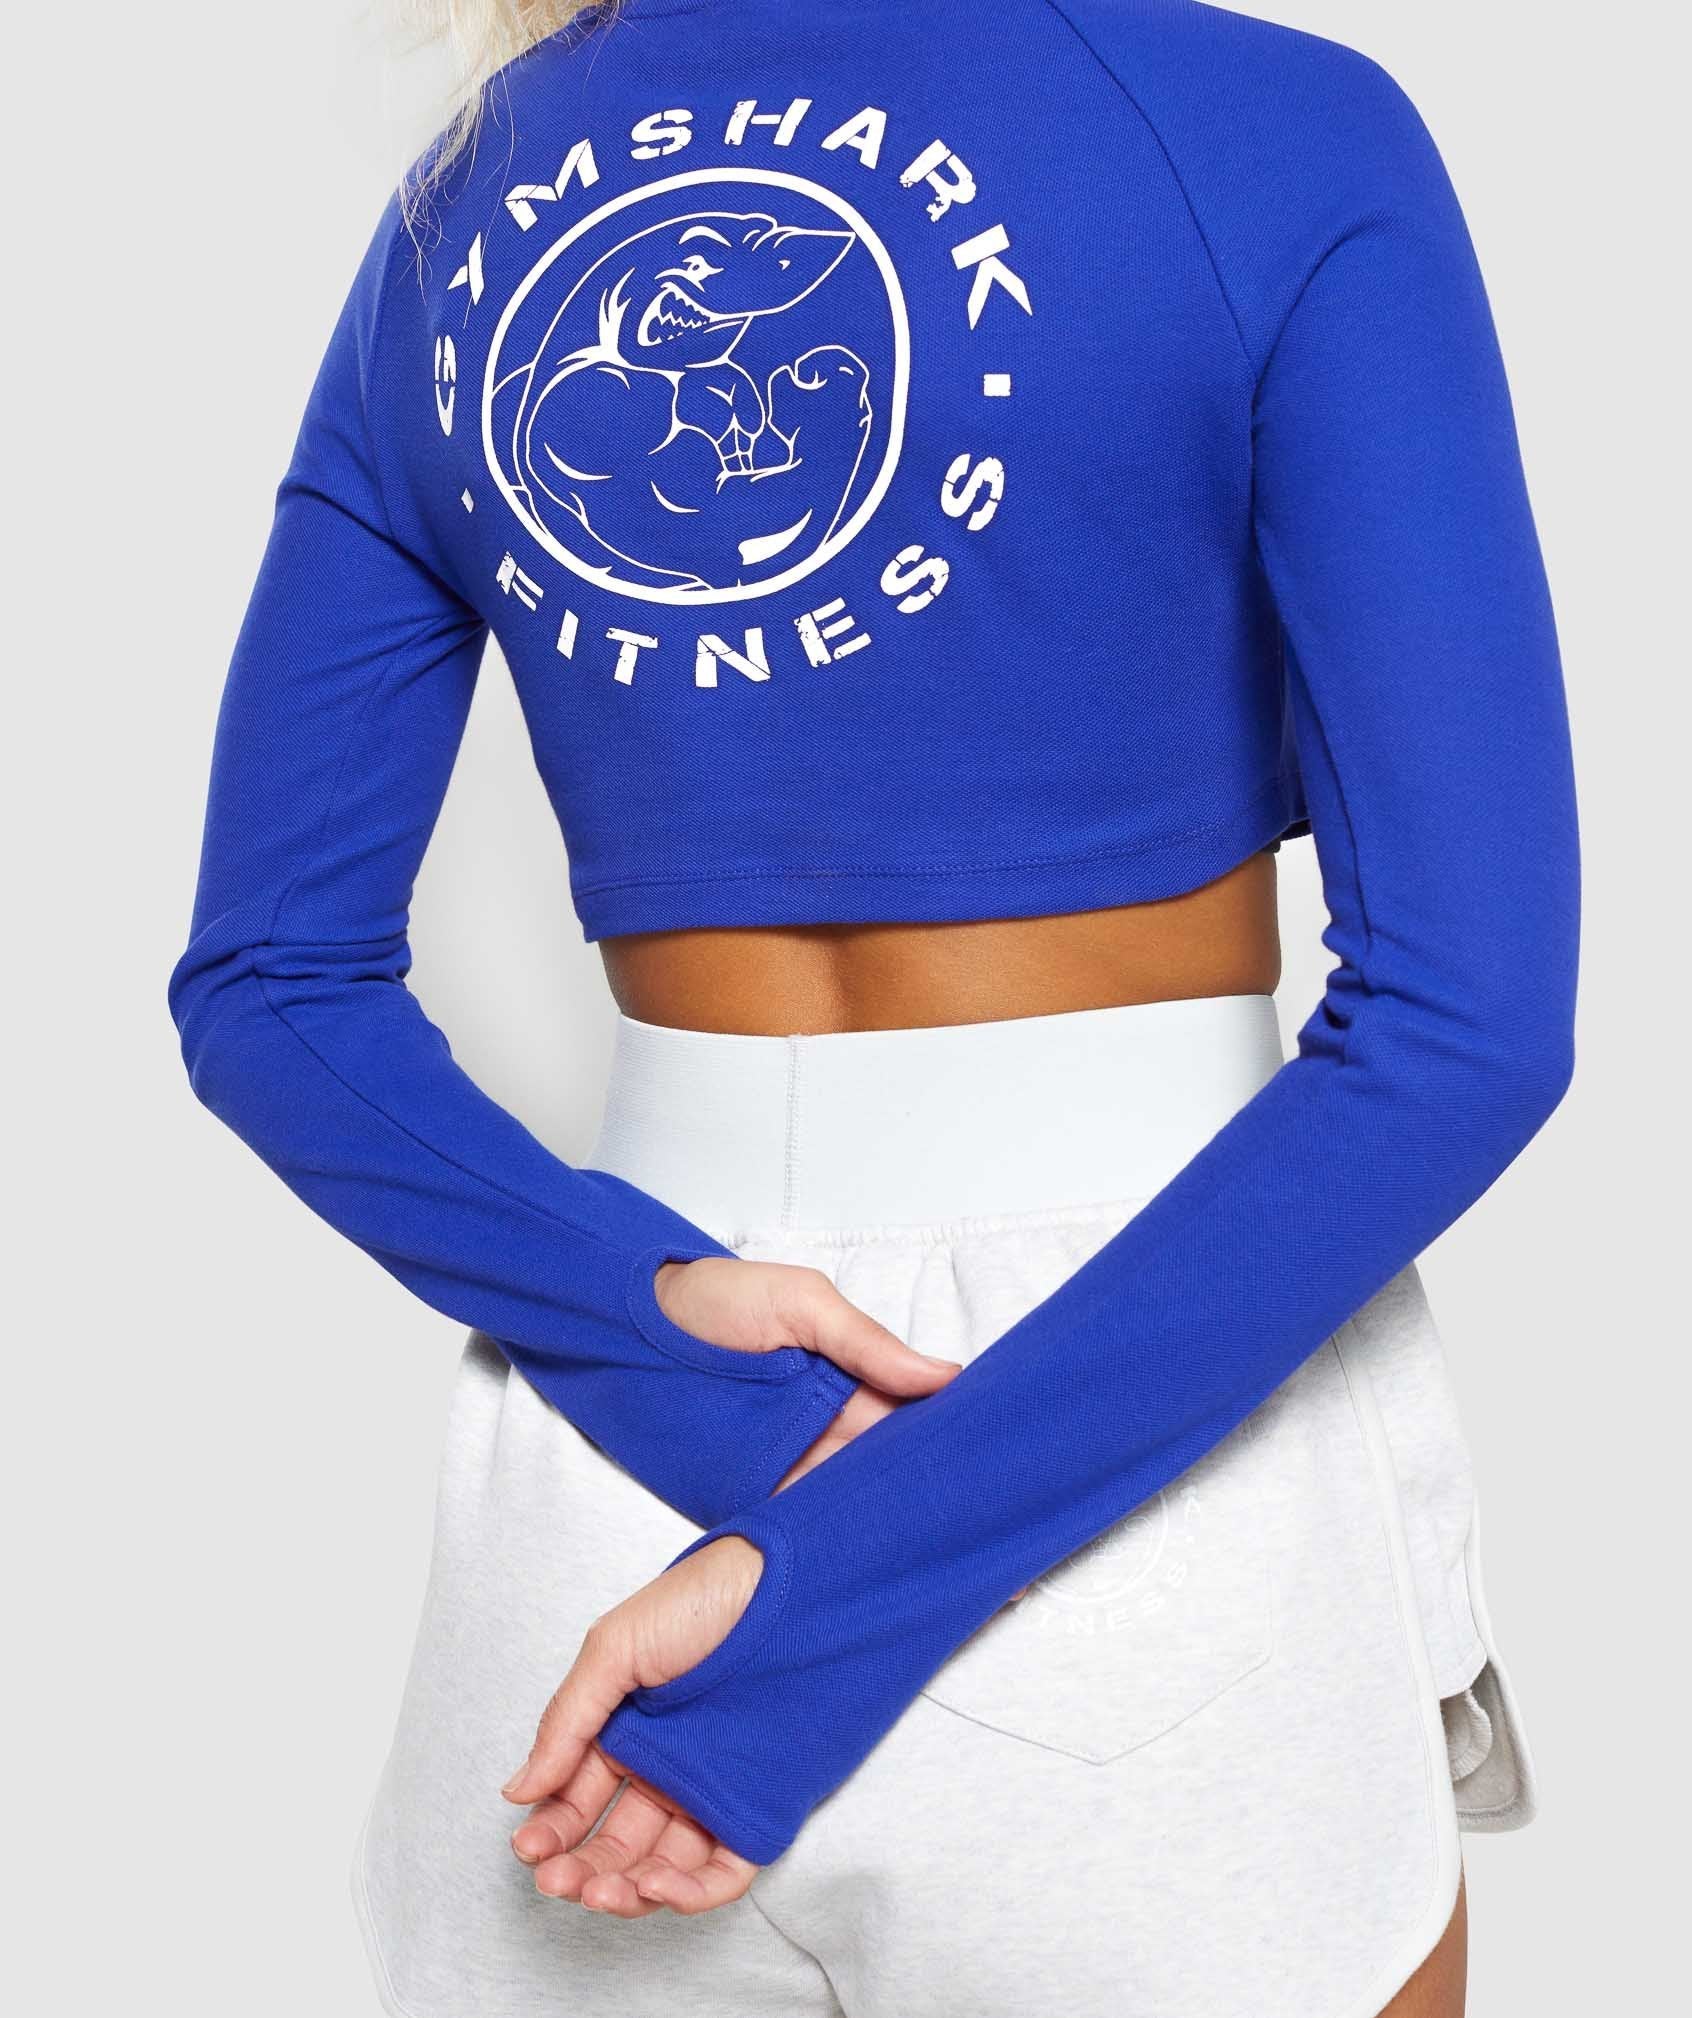 Legacy Fitness Long Sleeve Crop Top in Blue - view 5